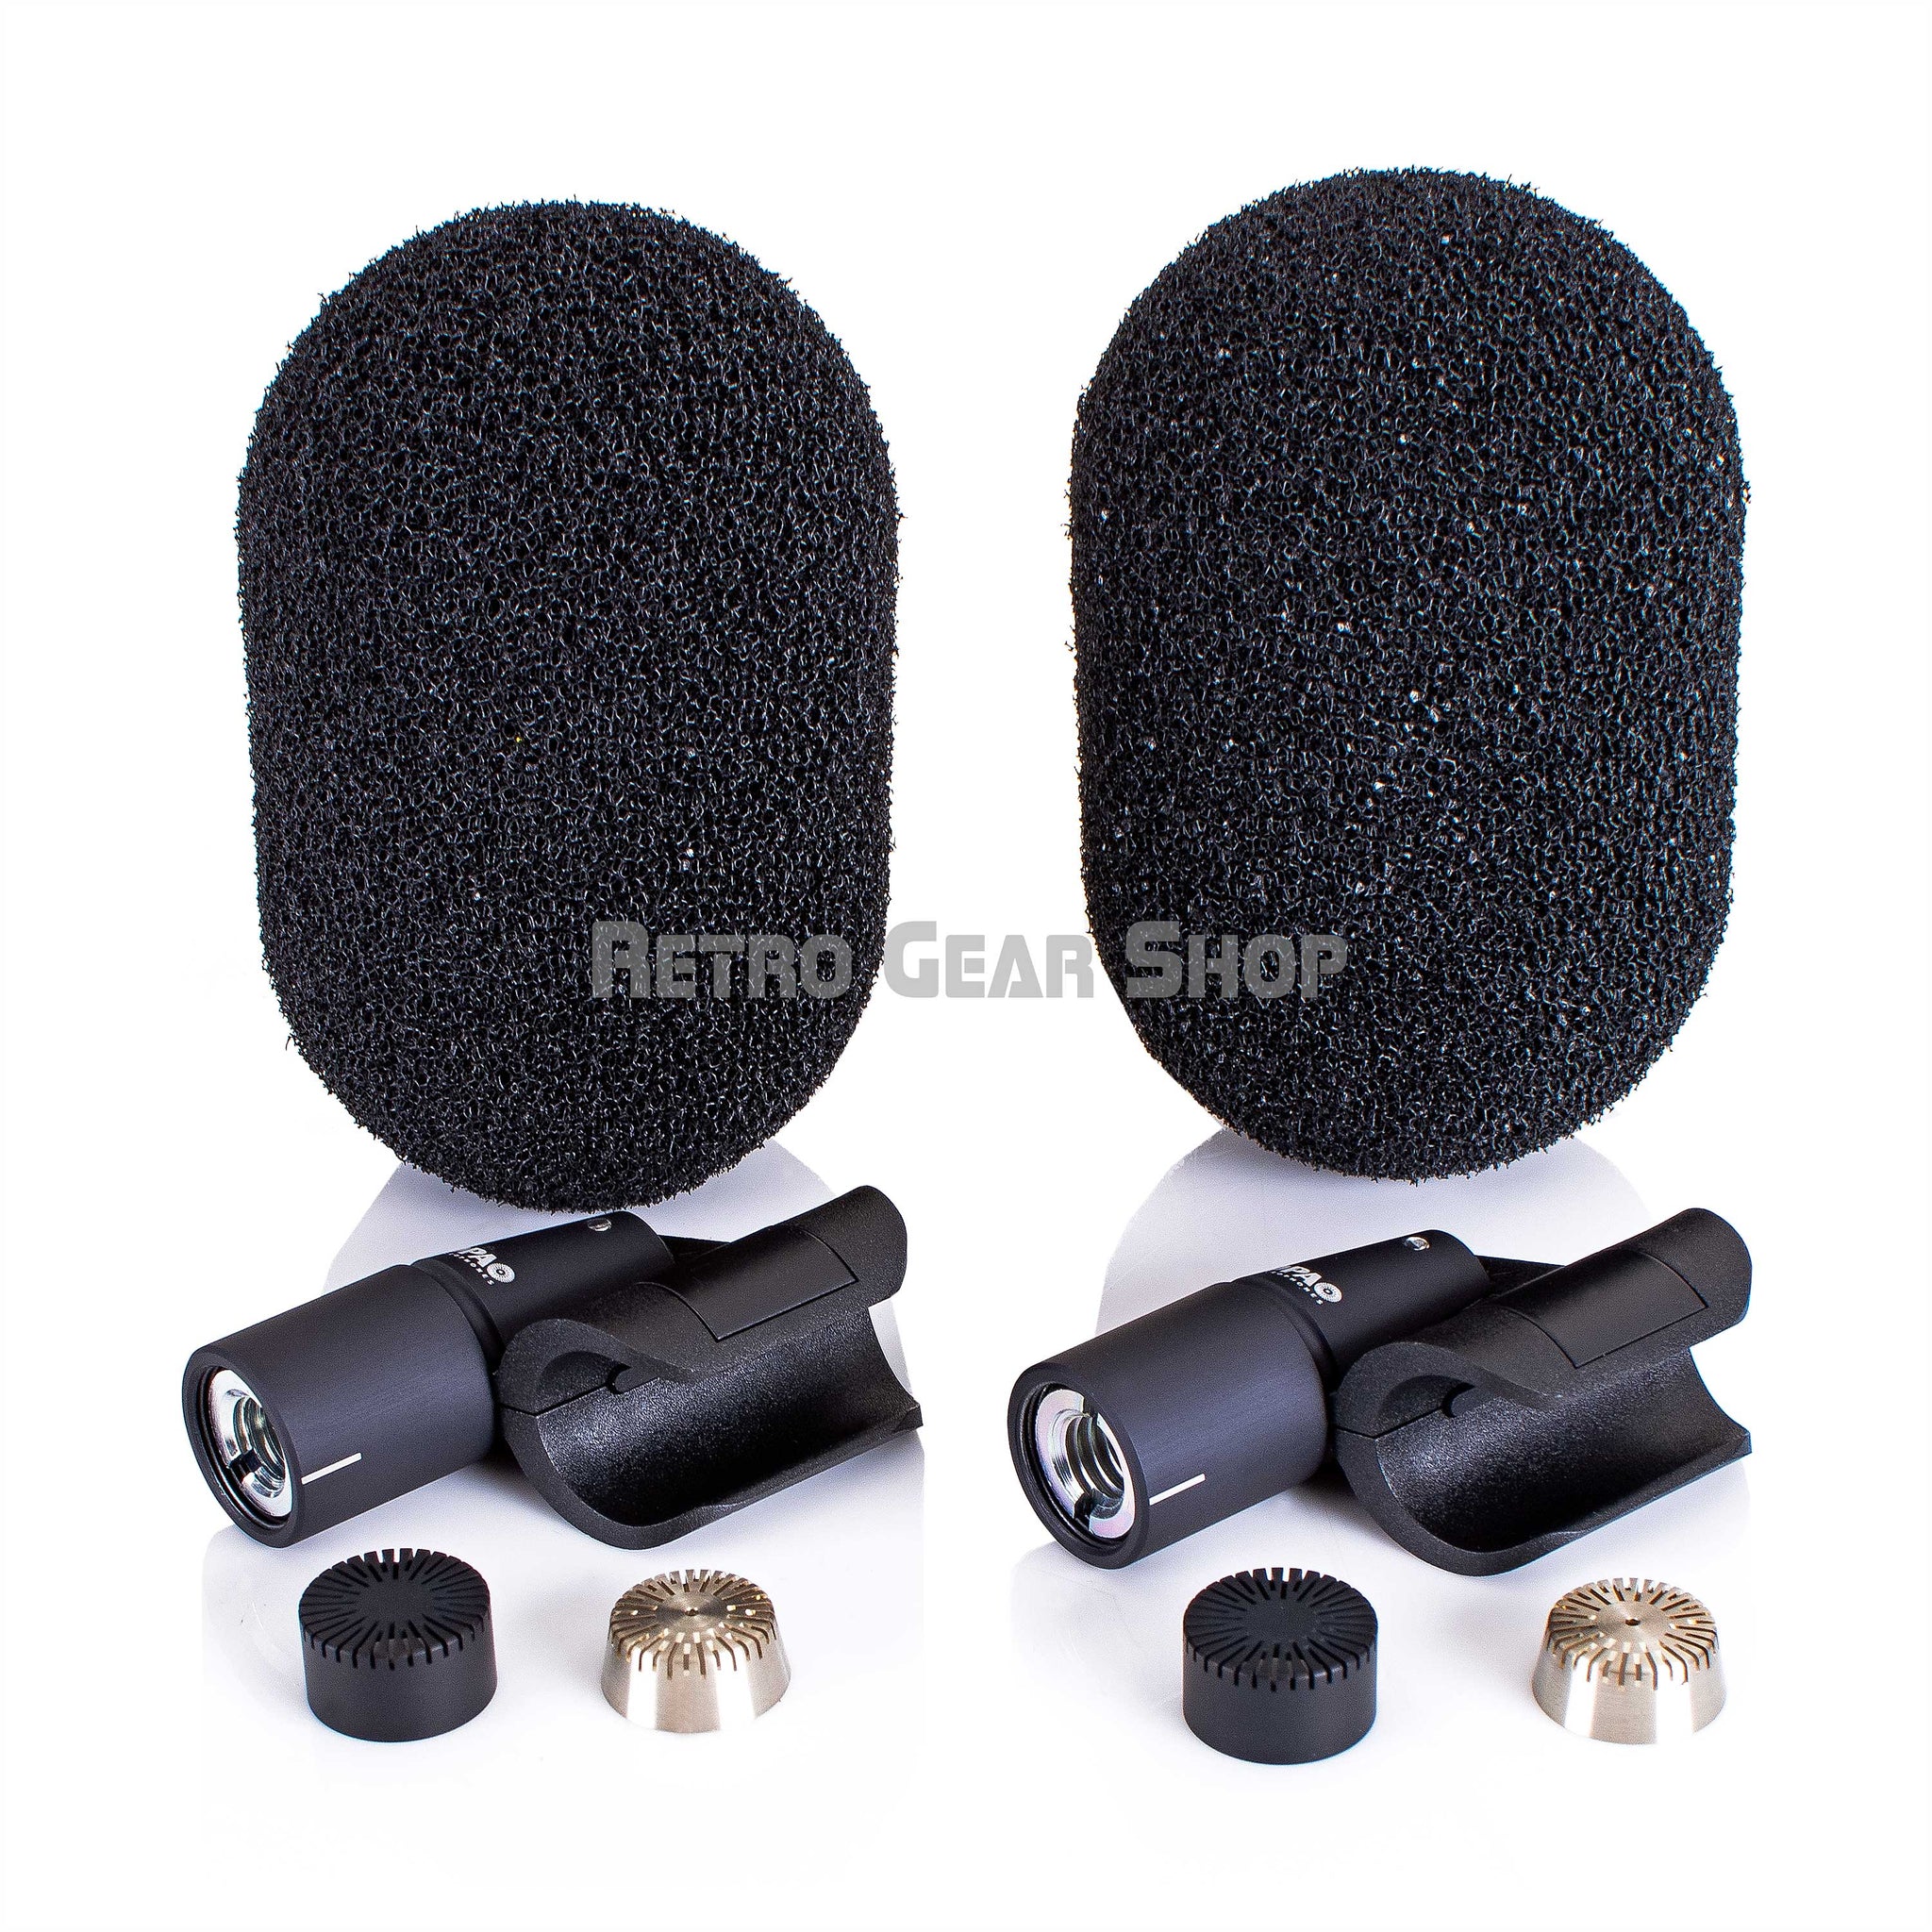 DPA Microphones ST 4006A Pair Windscreens Clips Capsules